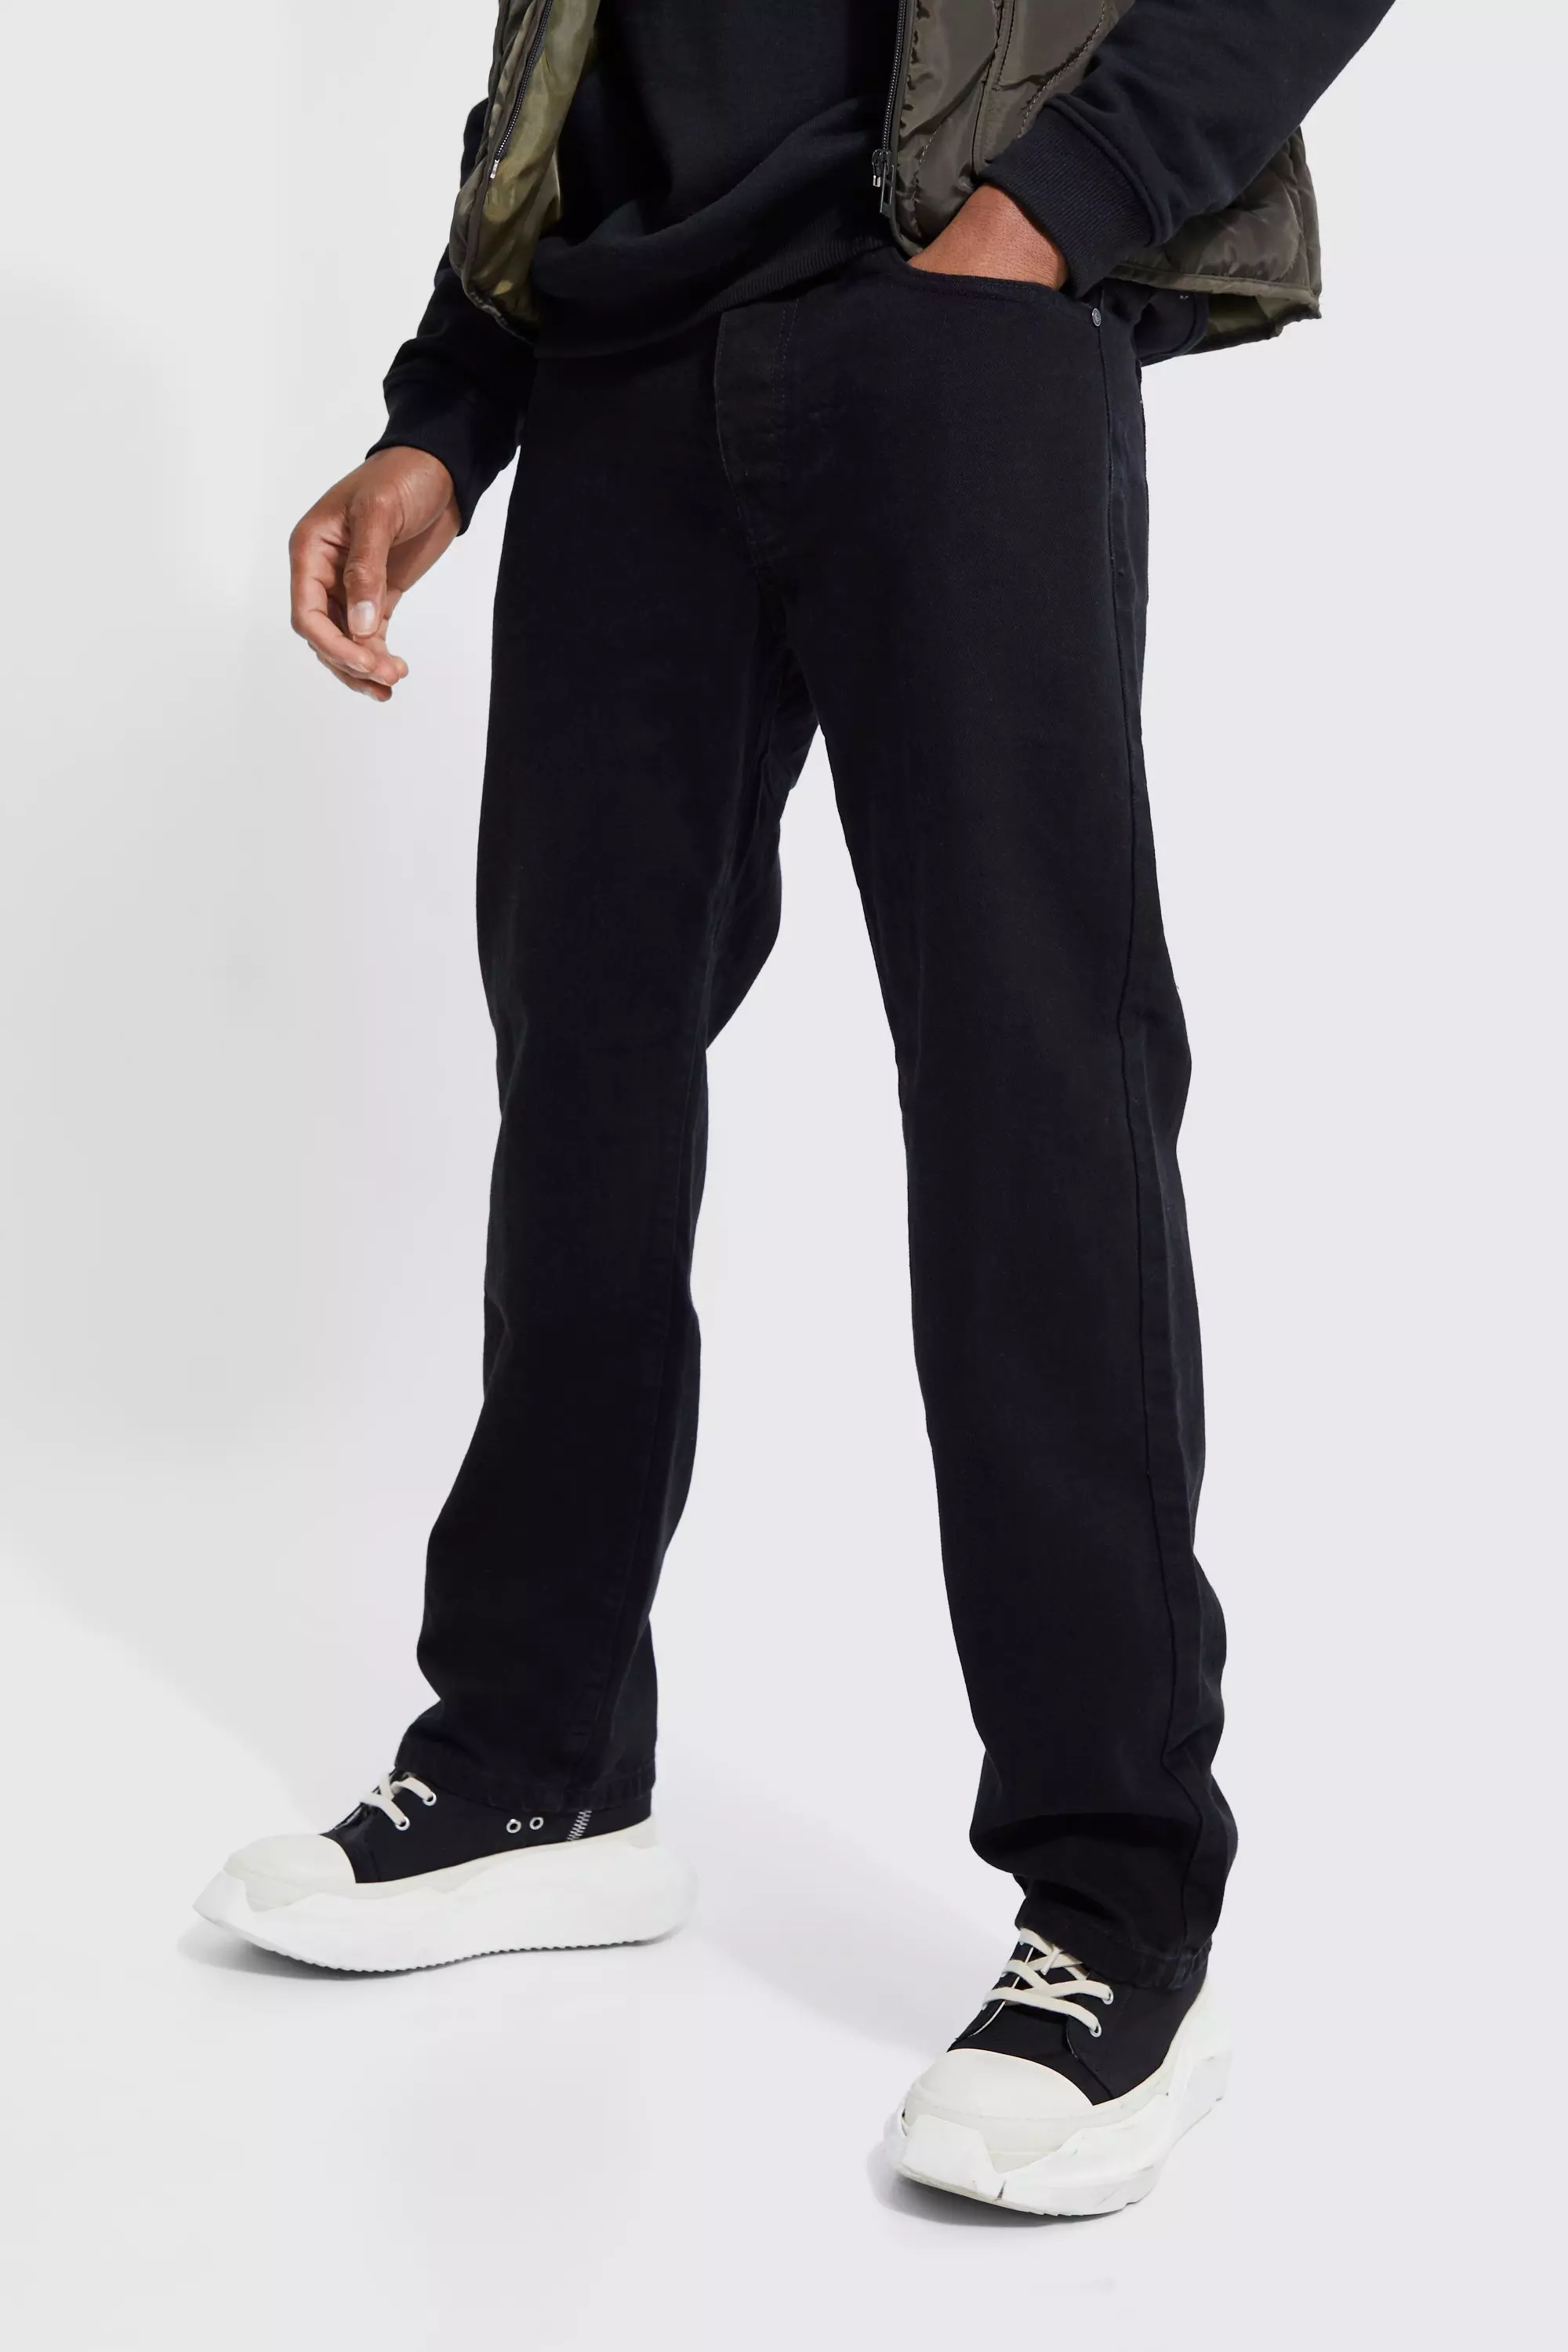 Black Relaxed Fit Rigid Jeans